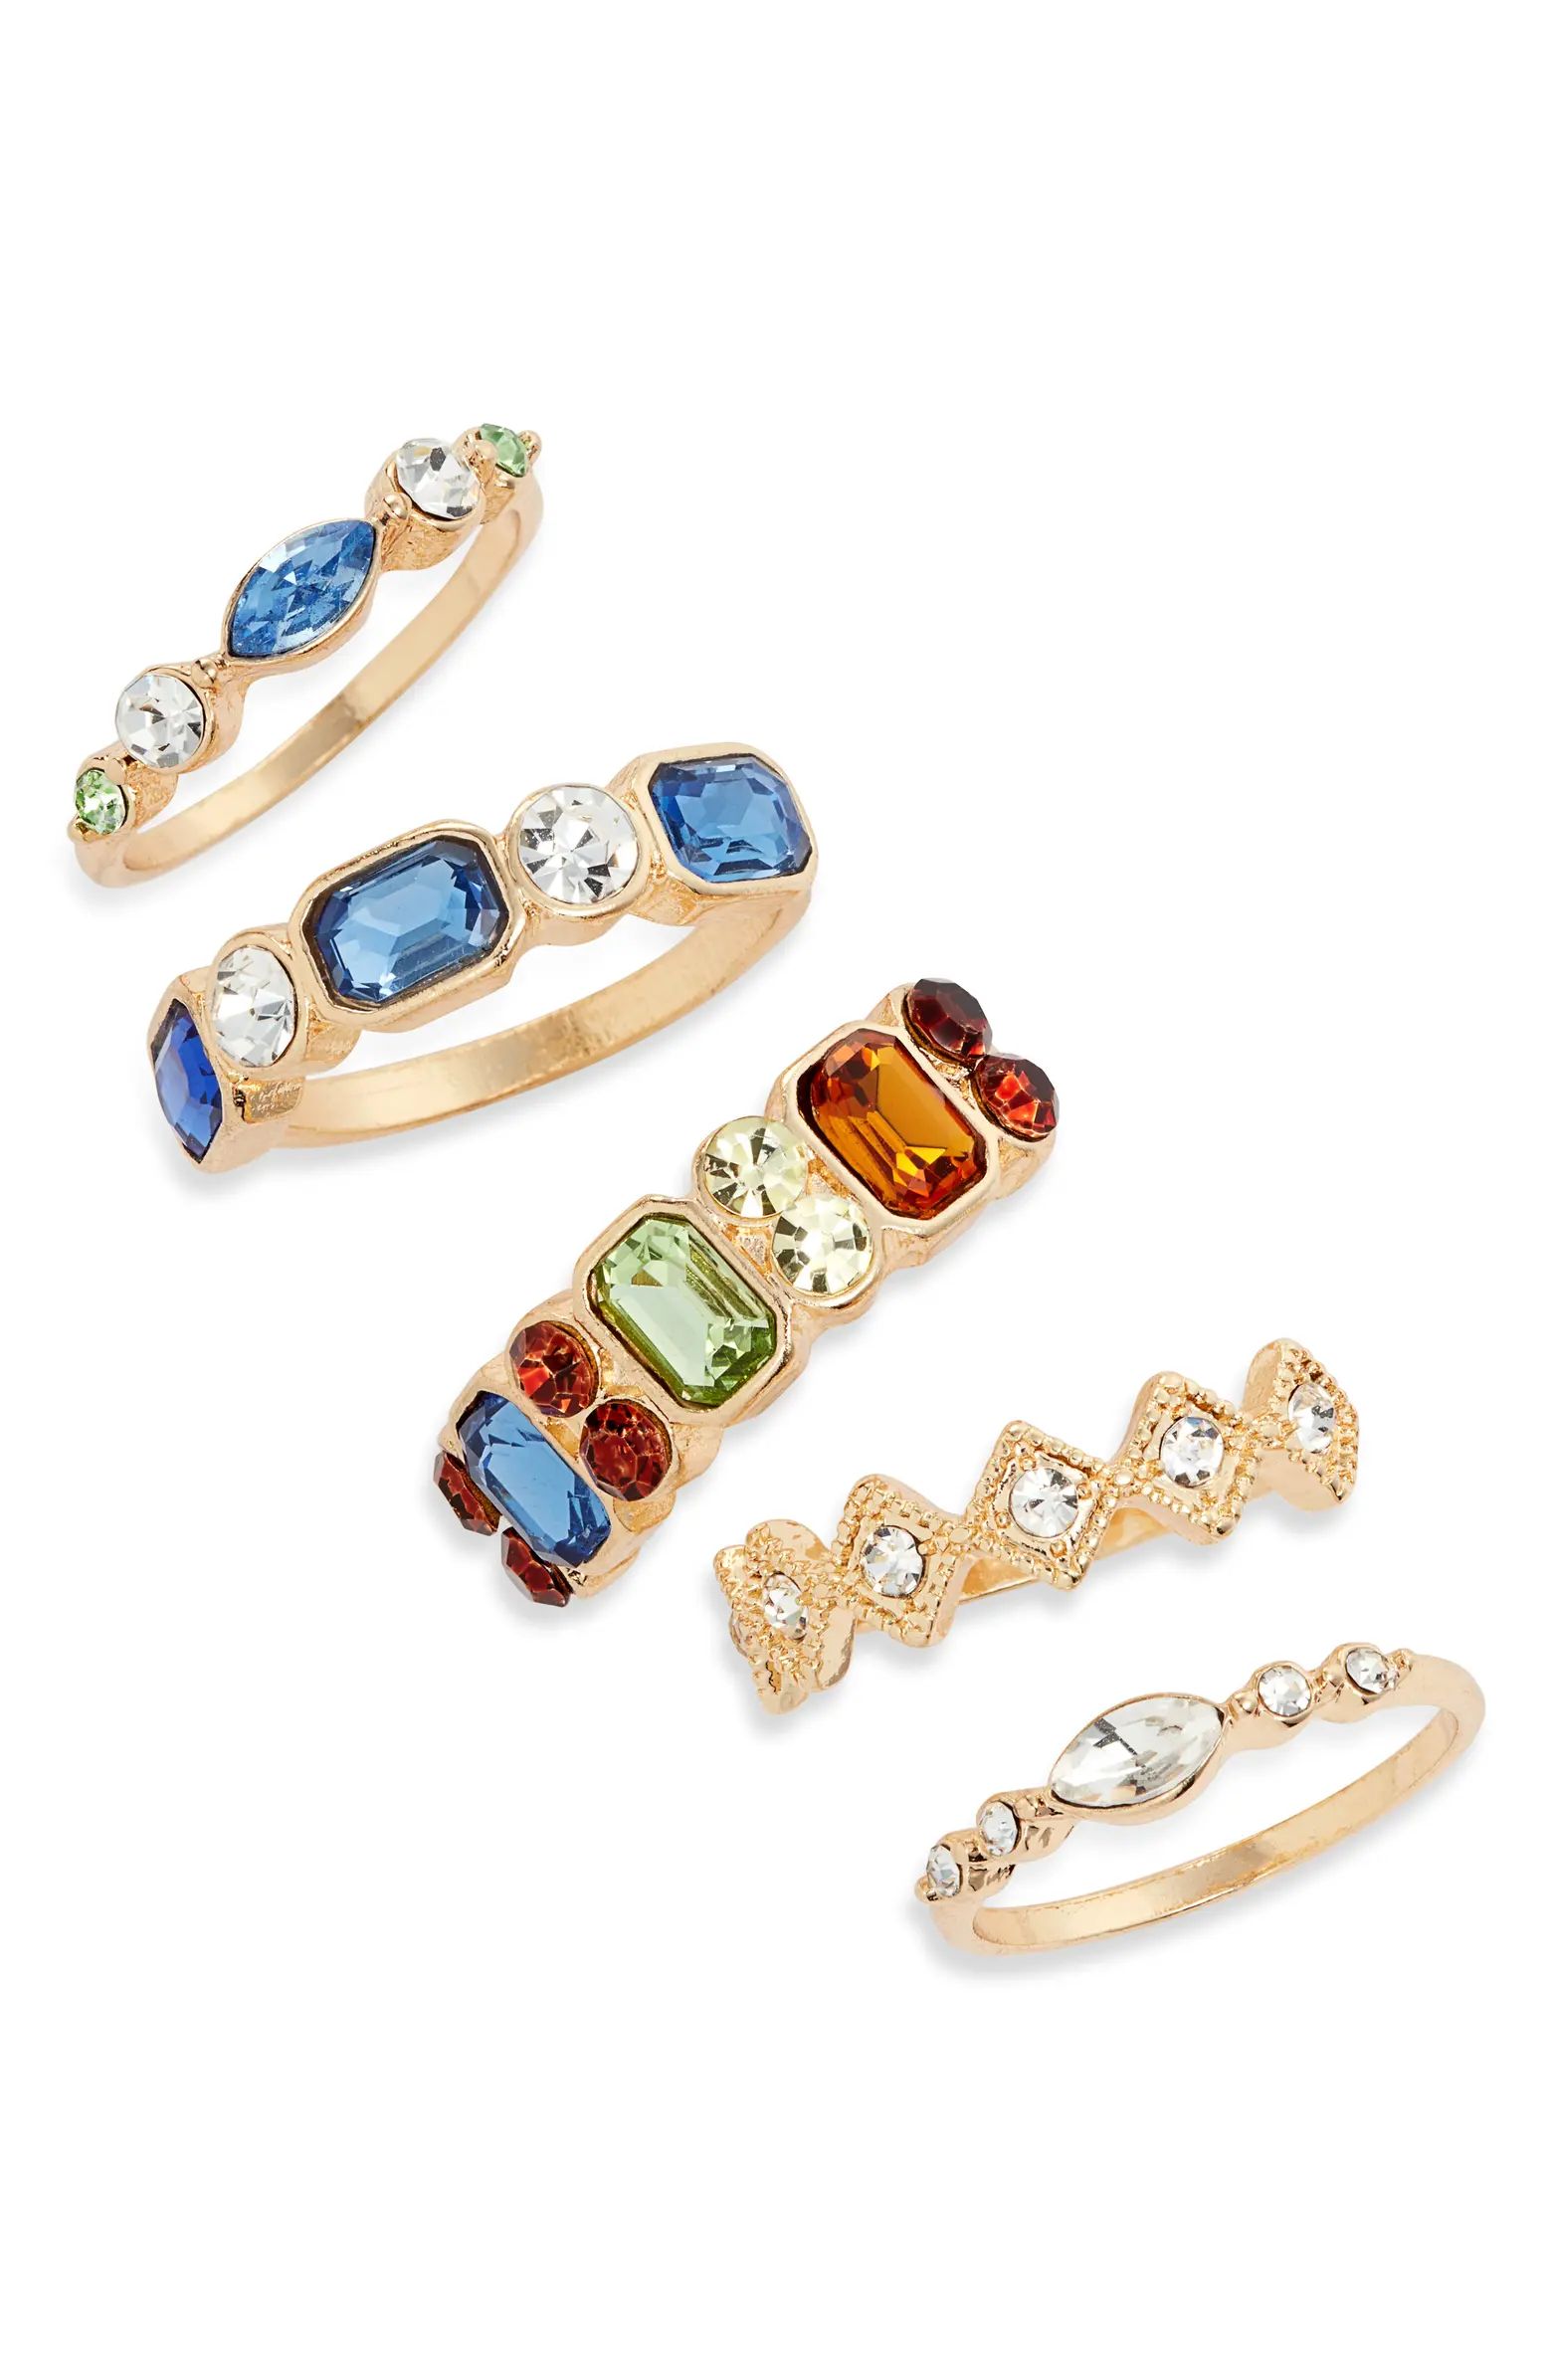 Set of 5 Colorful Crystal Rings | Nordstrom